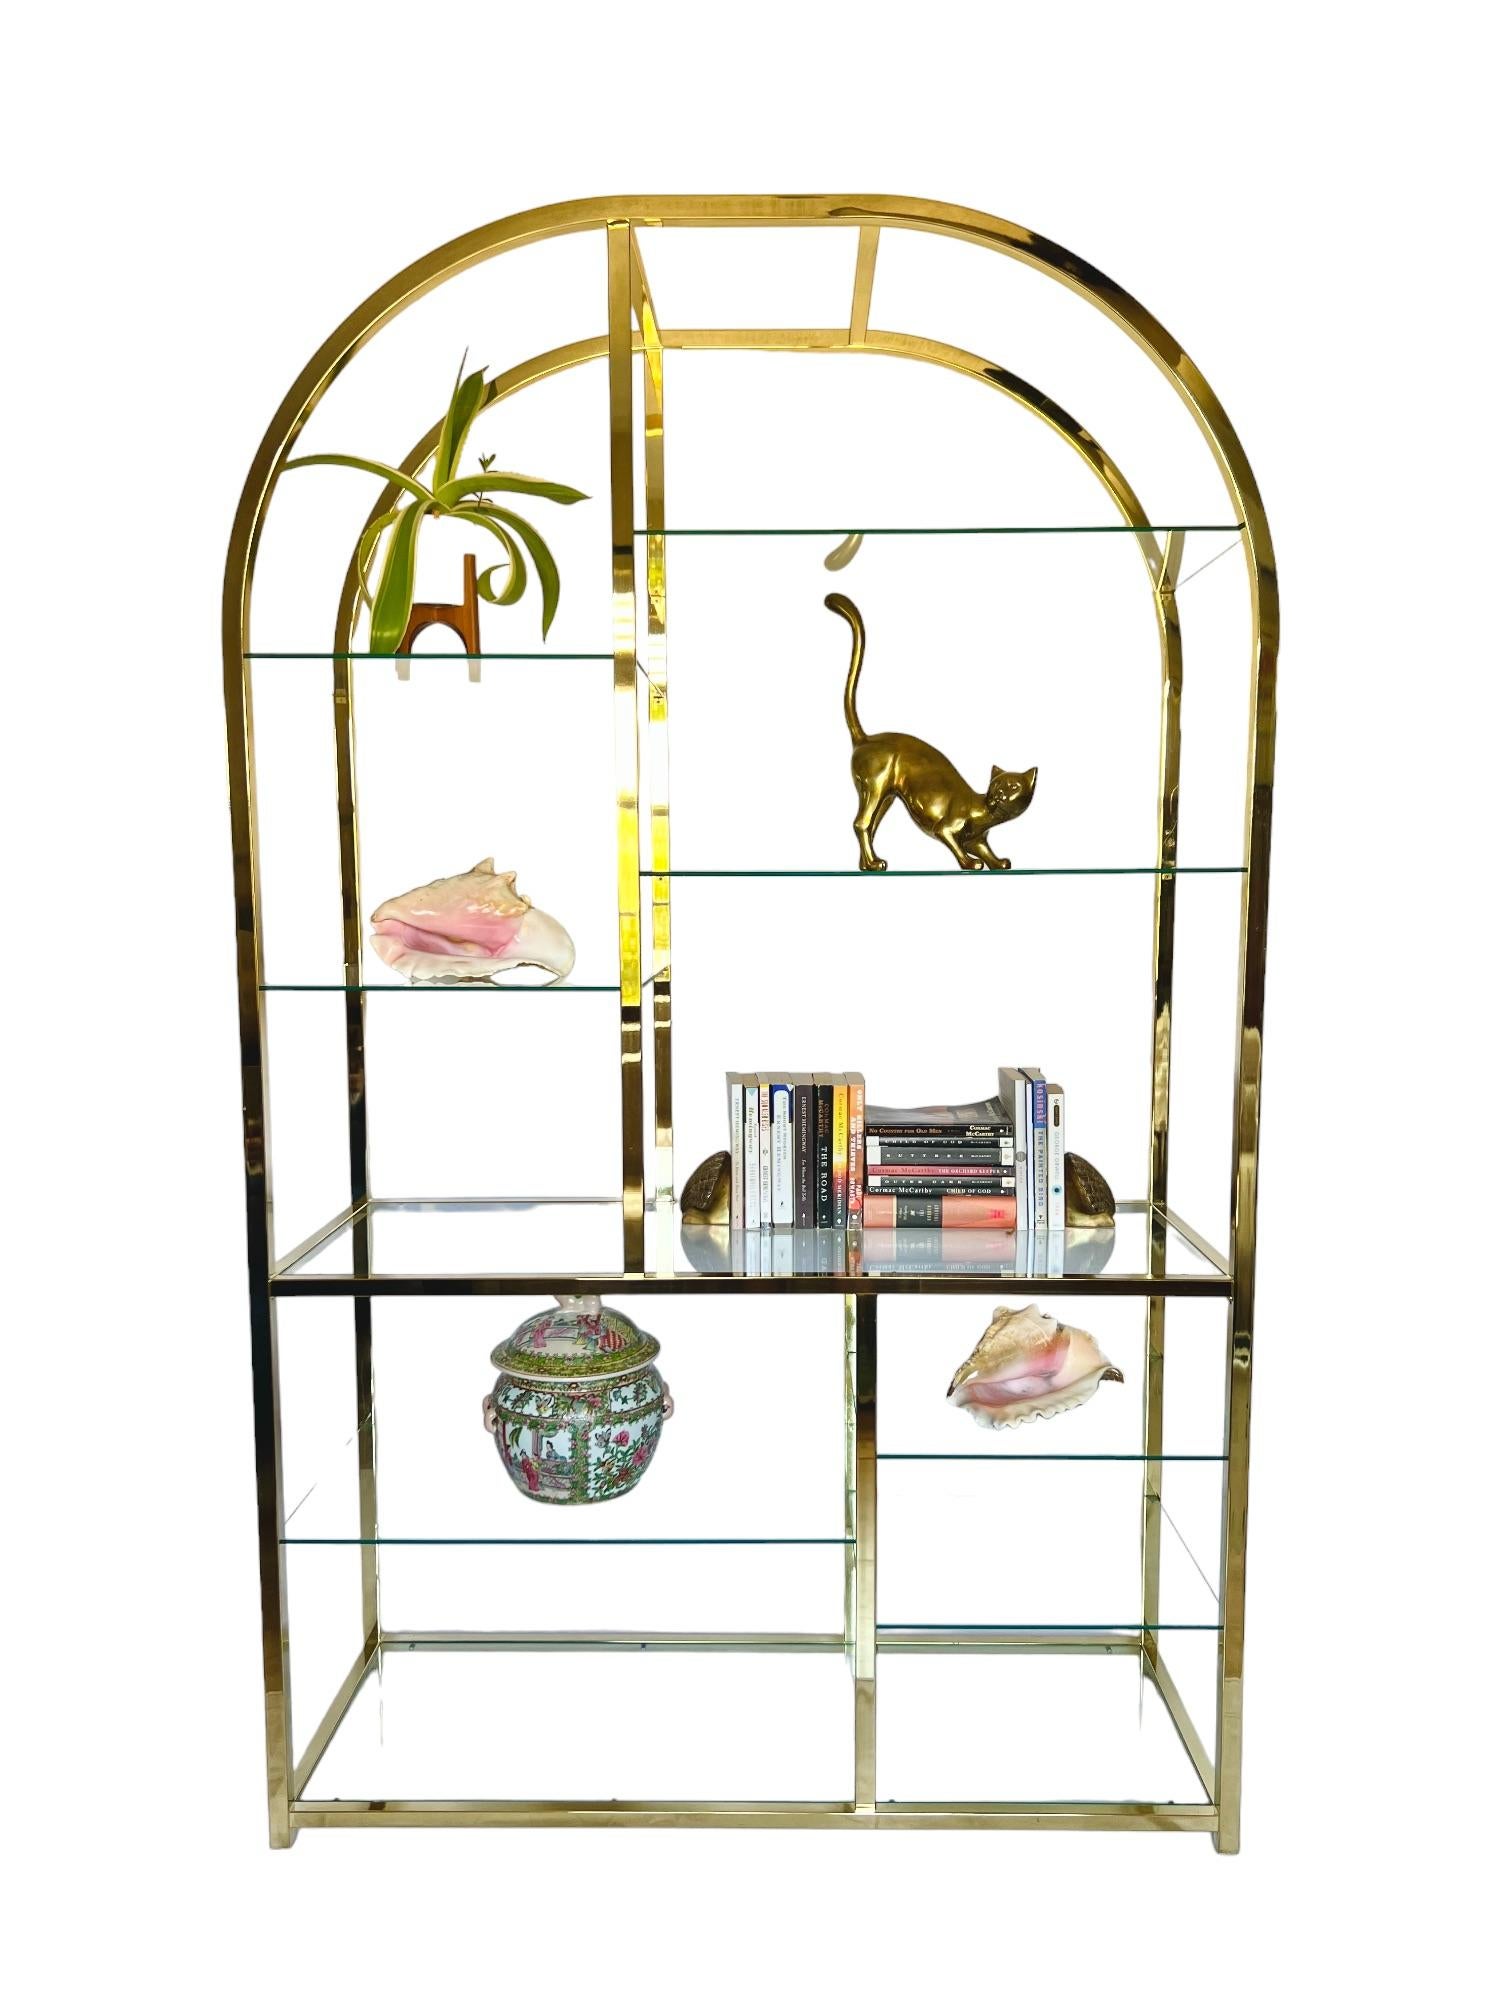 A vintage Hollywood regency style polished brass plated metal étagère featuring an arched design and nine glass tiered display shelves - two full-length, three medium & four small.
By DIA - Design Institute of America, 1985.

Dimensions: 48